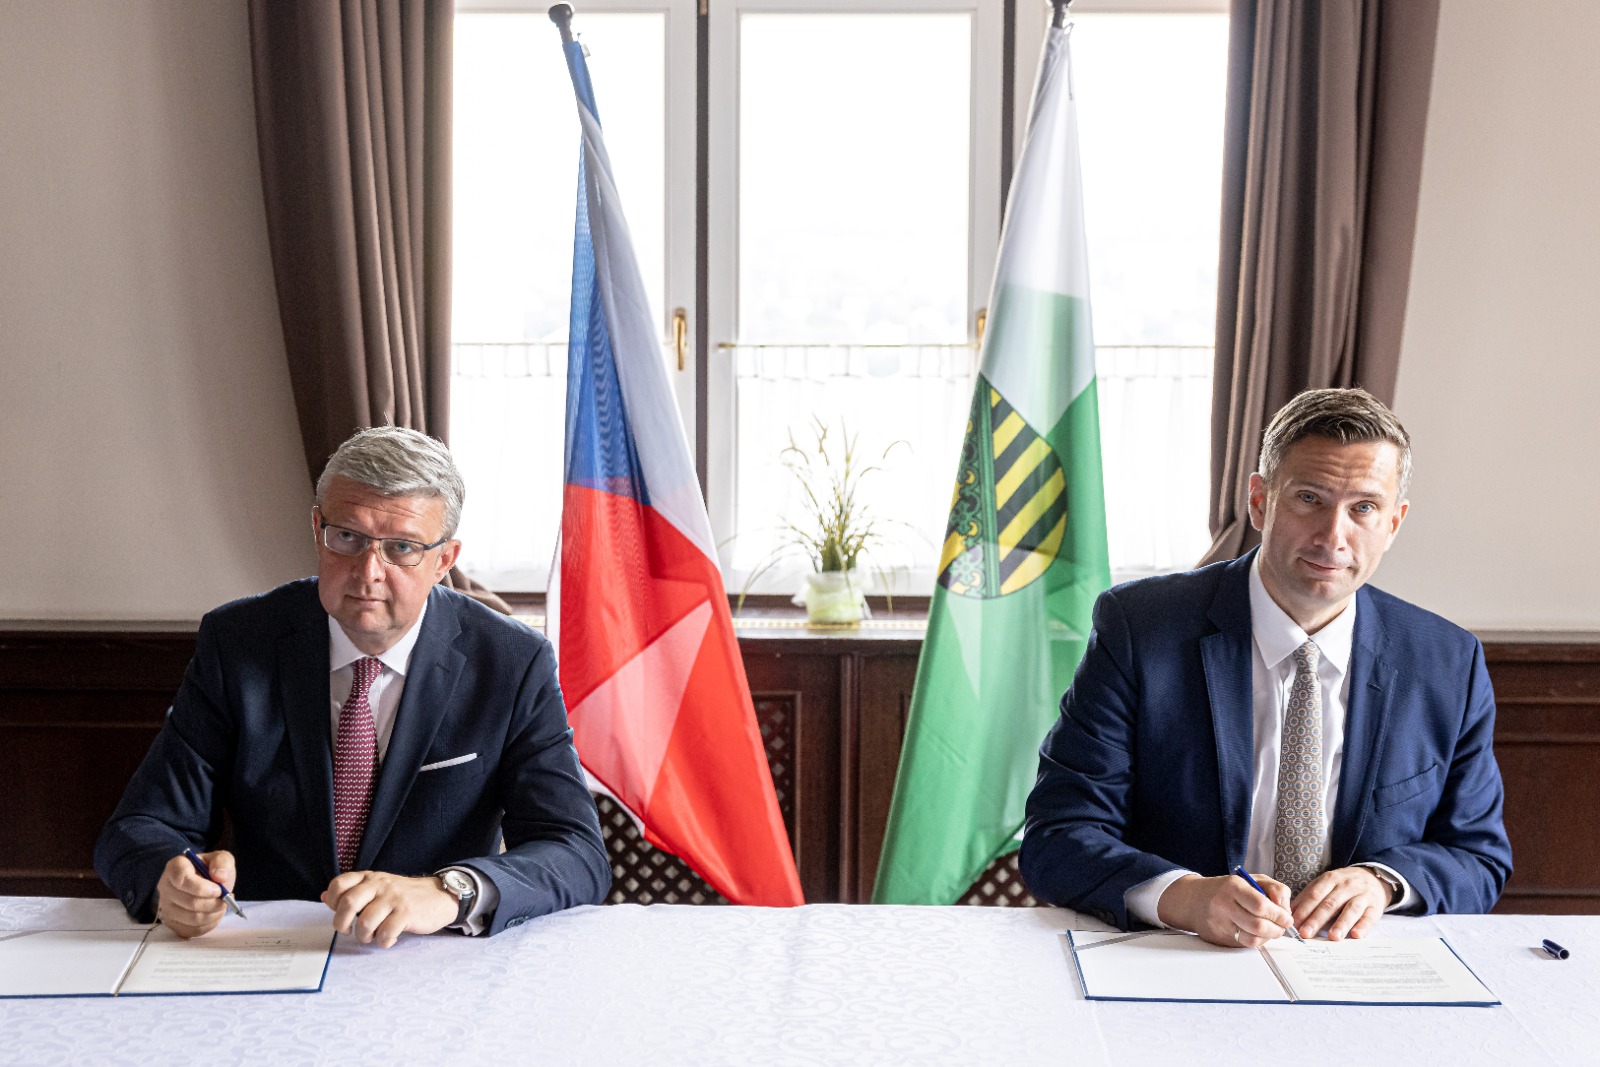 Cooperation between the Czech Republic and Saxony: high-speed railway and hydrogen transport